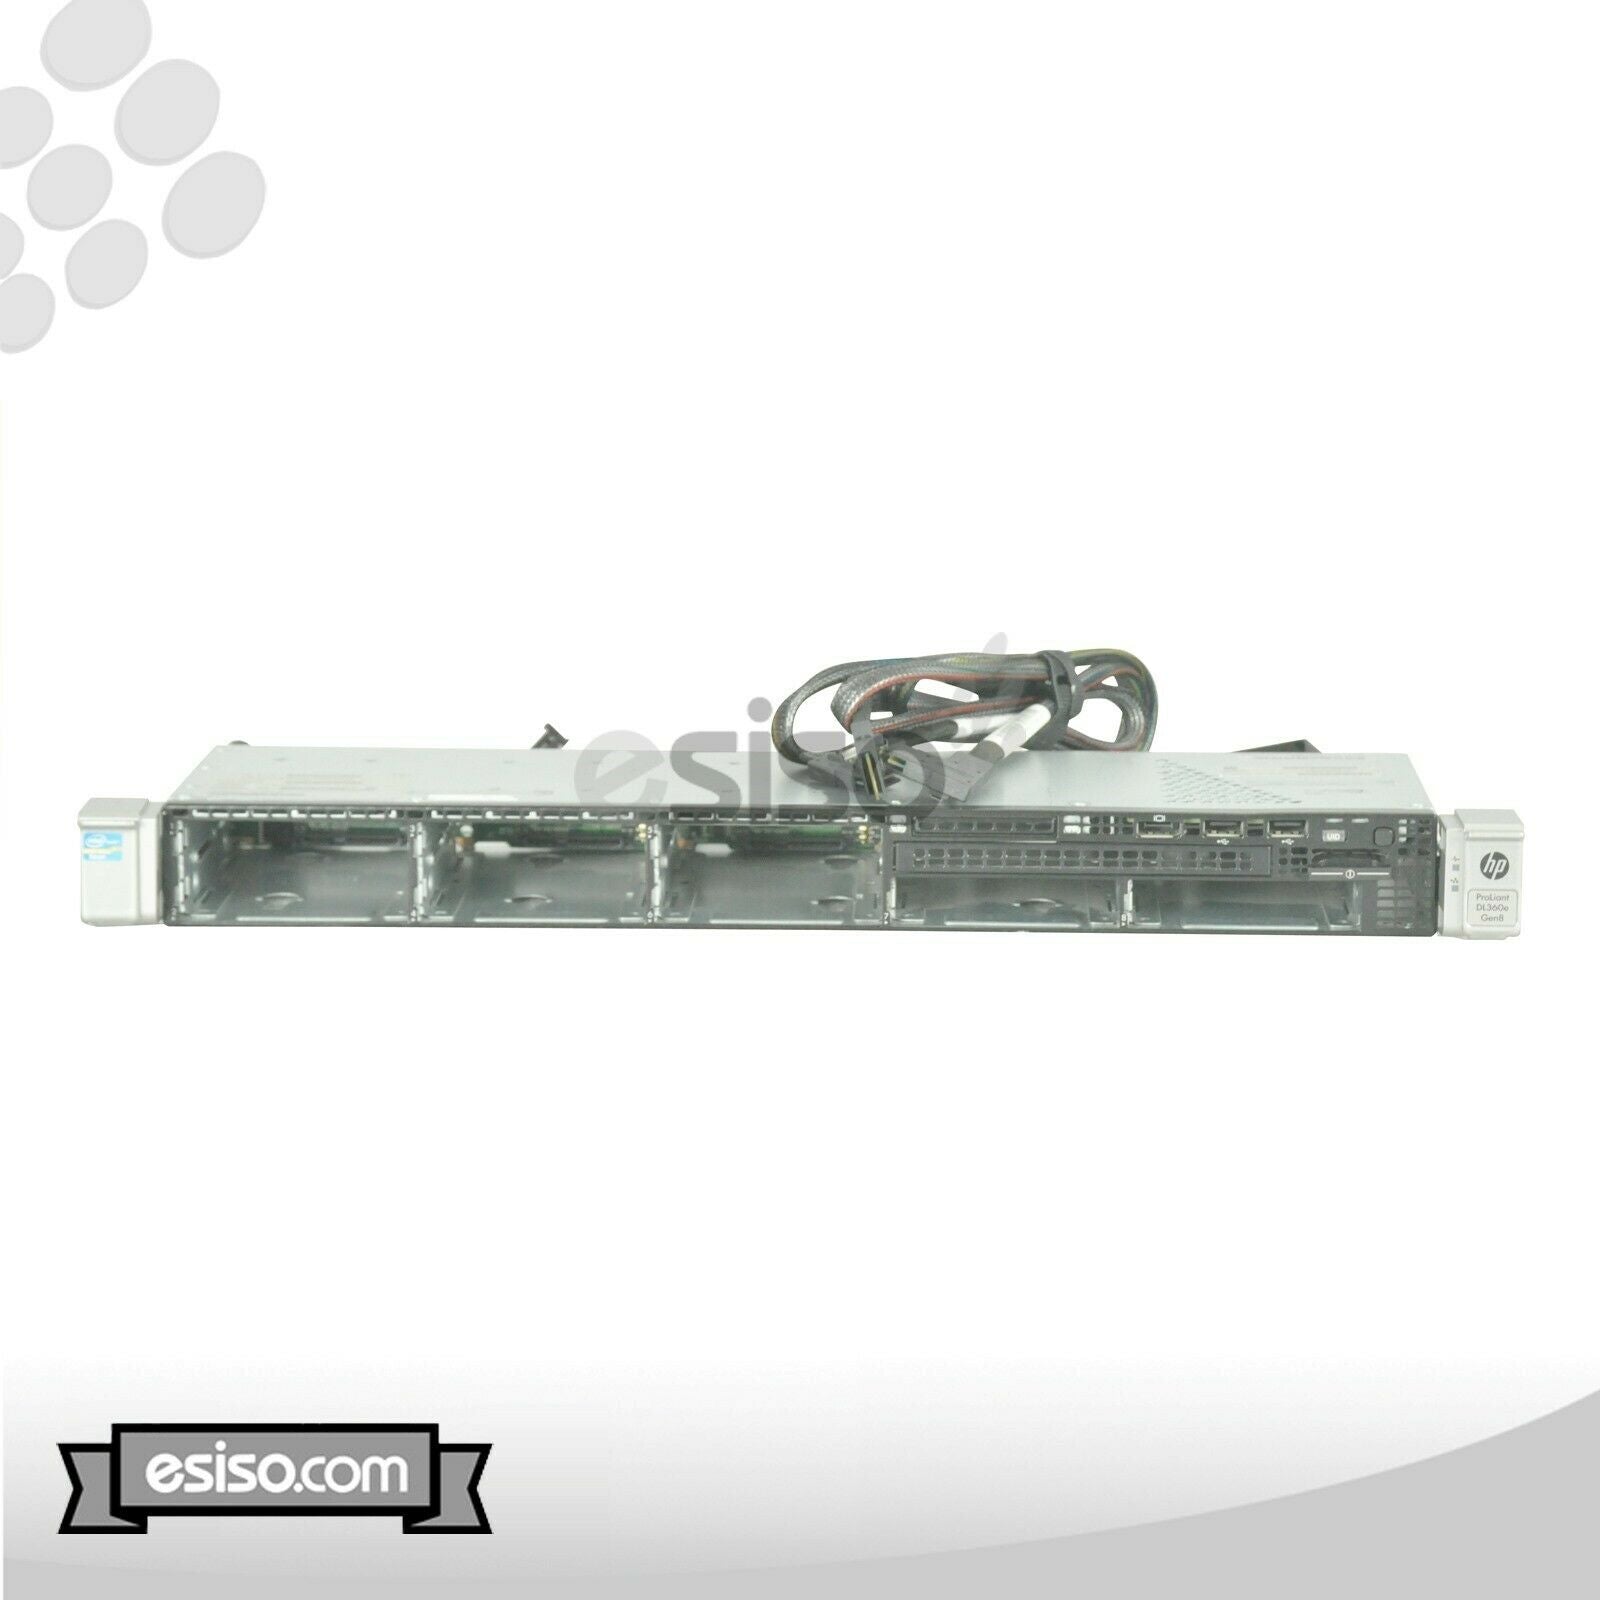 684961-001 HP 8 SFF FRONT DRIVE CAGE WITH BACKPLANE FOR PROLIANT DL360e G8 GEN8